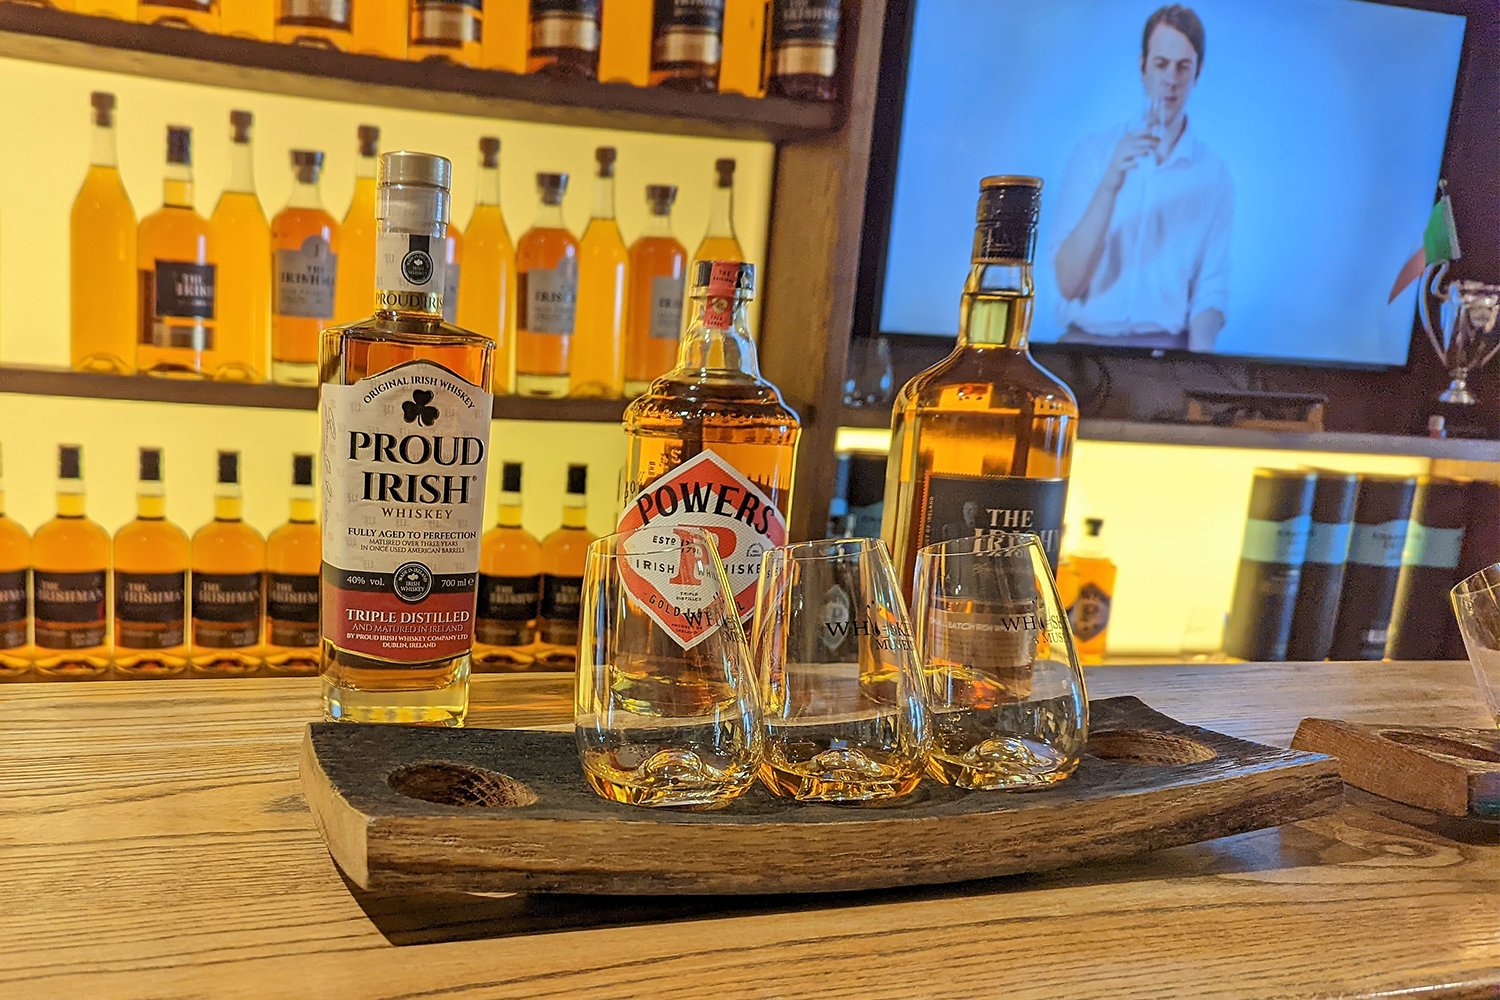 A tasting of three whiskies from Ireland at the Irish Whiskey Museum in Dublin